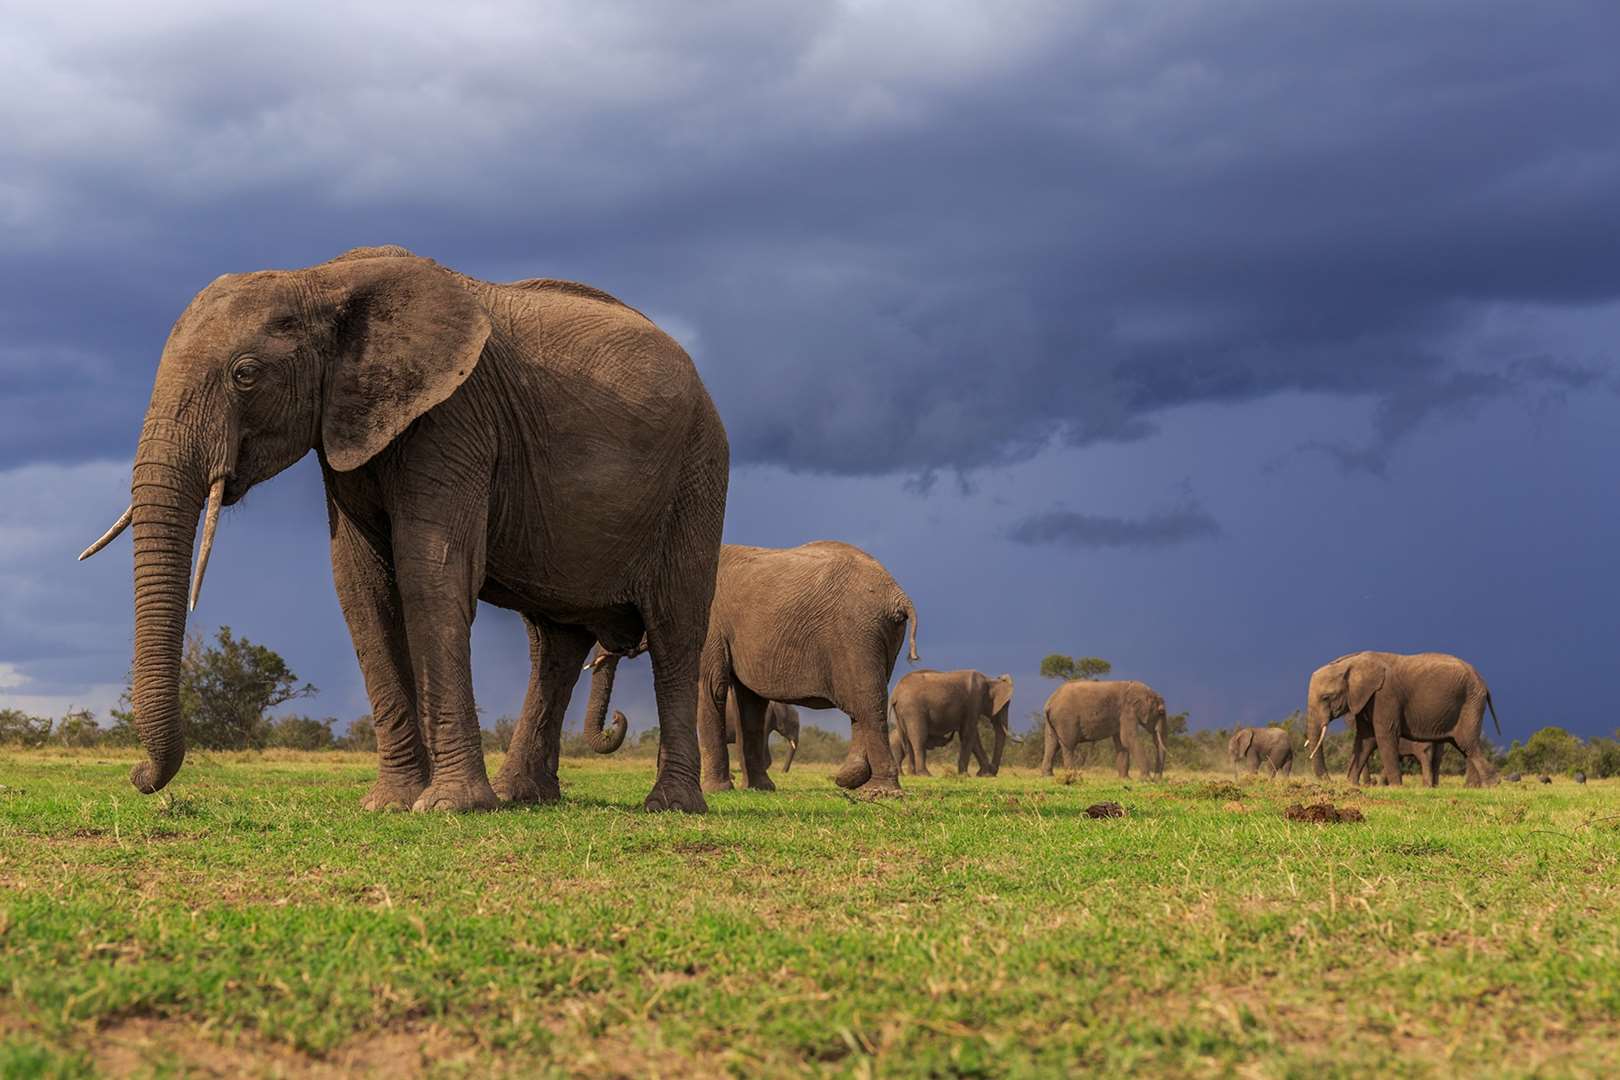 African elephants, Loxodonta africana, during a thunderstorm. Photo: Ronan Donovan / National Geographic